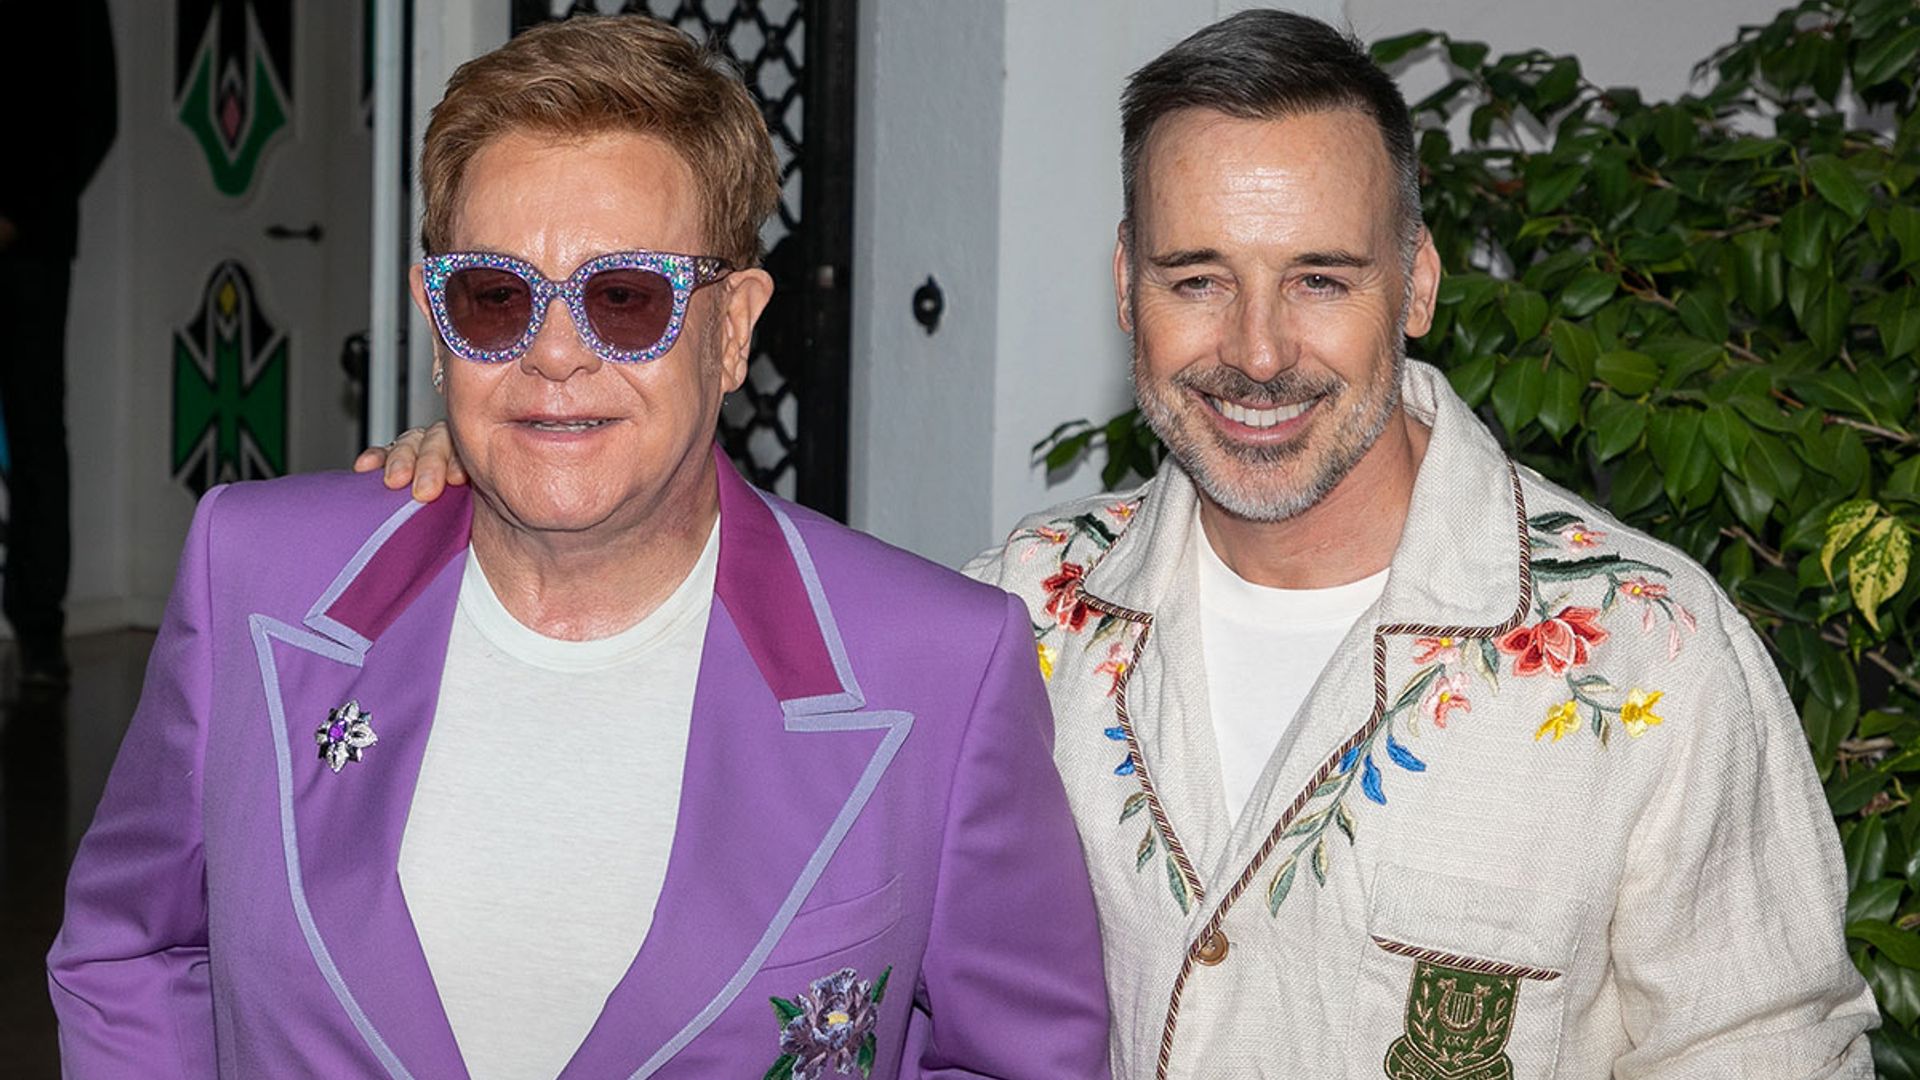 Sir Elton John's sons look so grown up as they head back to school - fans react